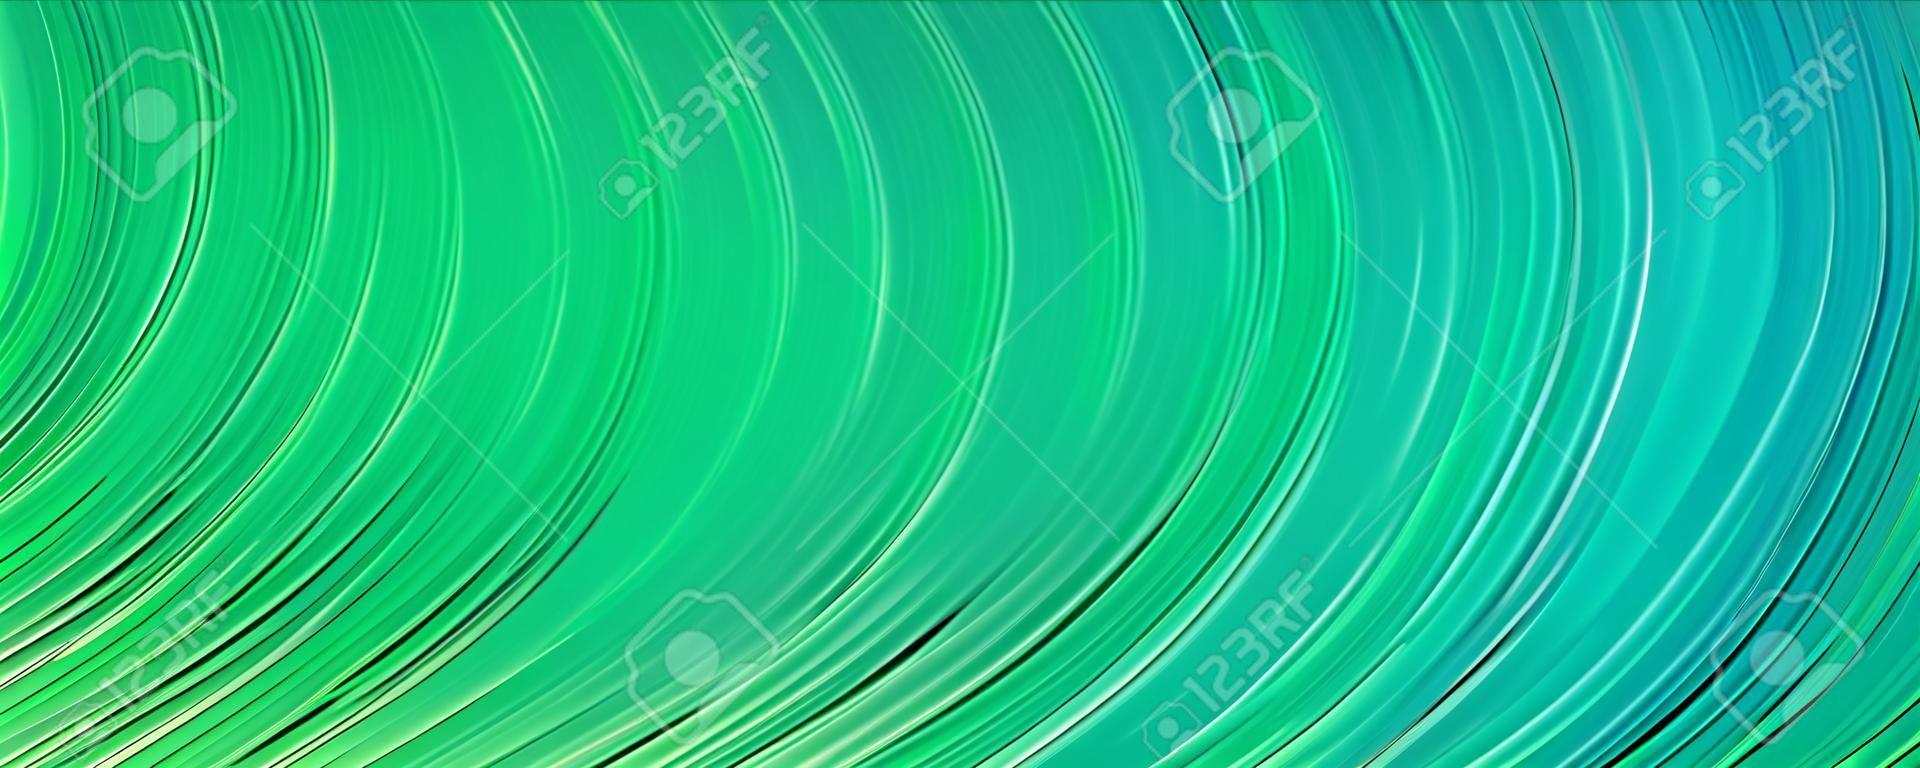 Modern green gradient backgrounds with lines. header banner. Bright geometric abstract presentation backdrops. vector illustration